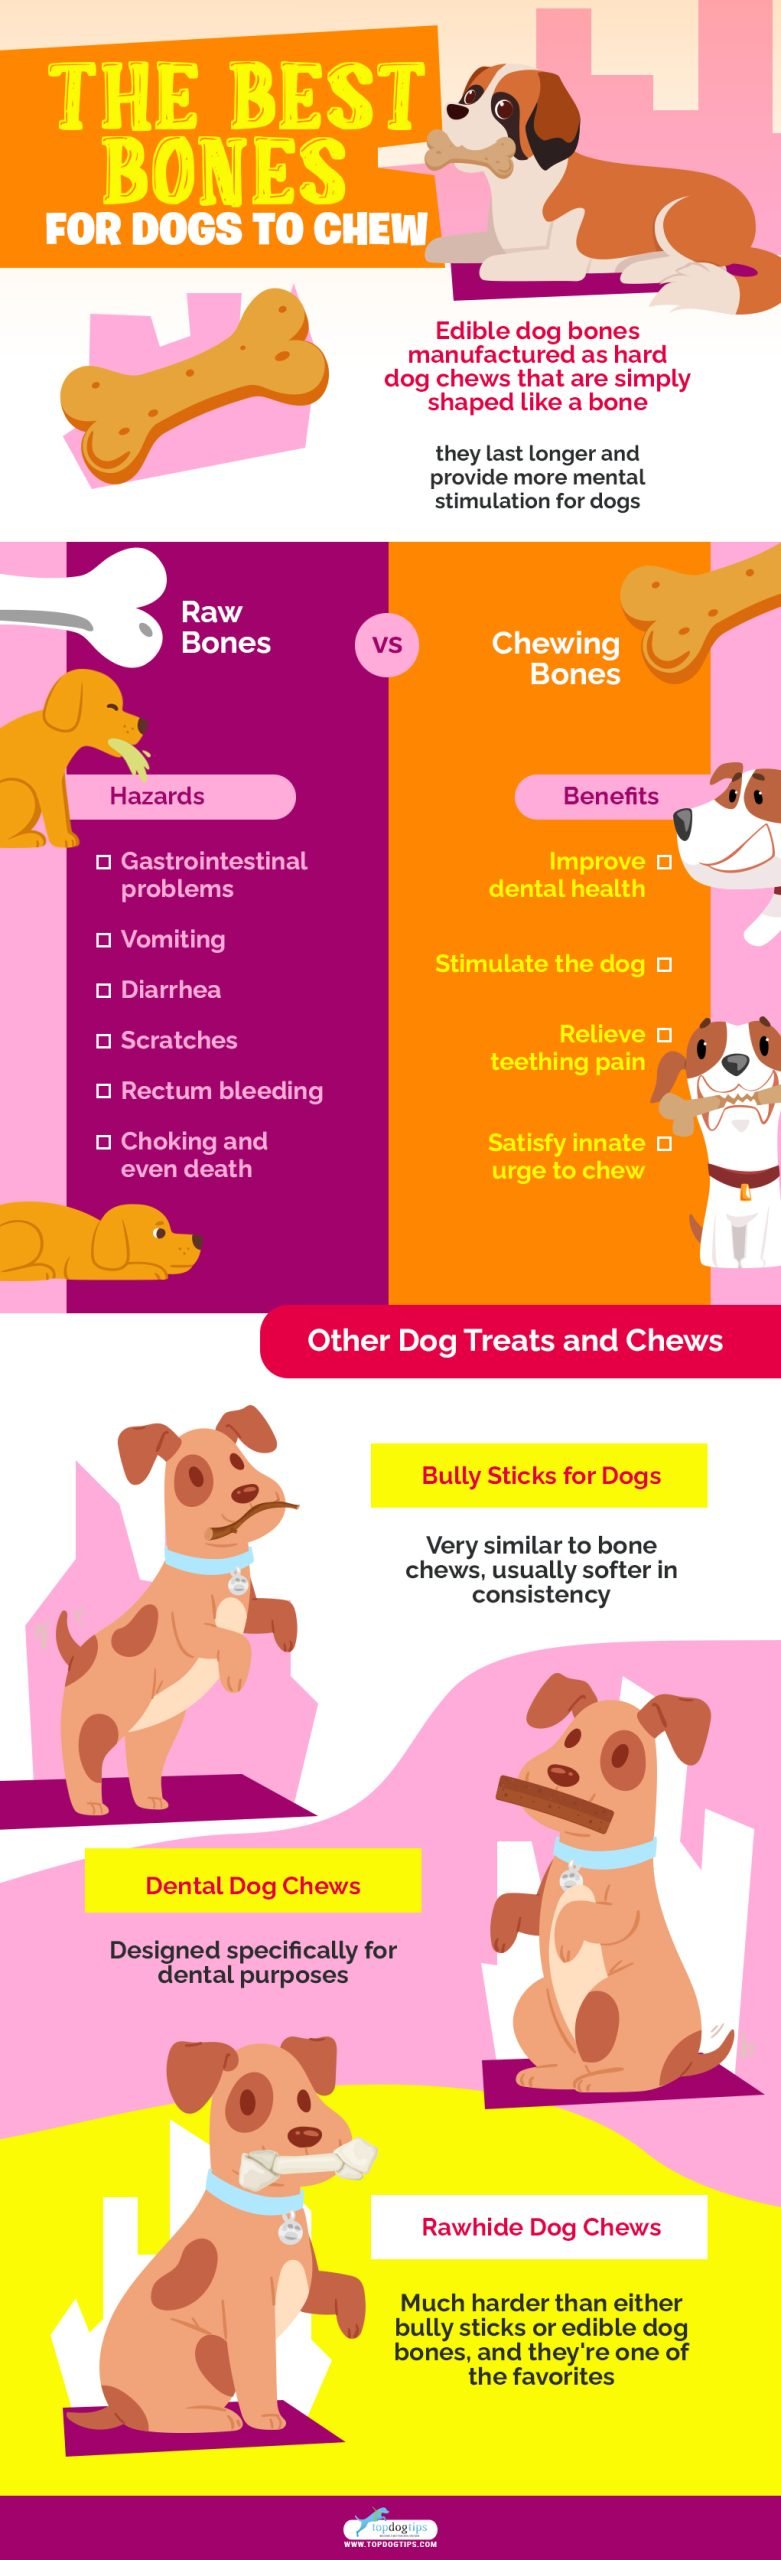  Best Bones for Dogs to Chew 